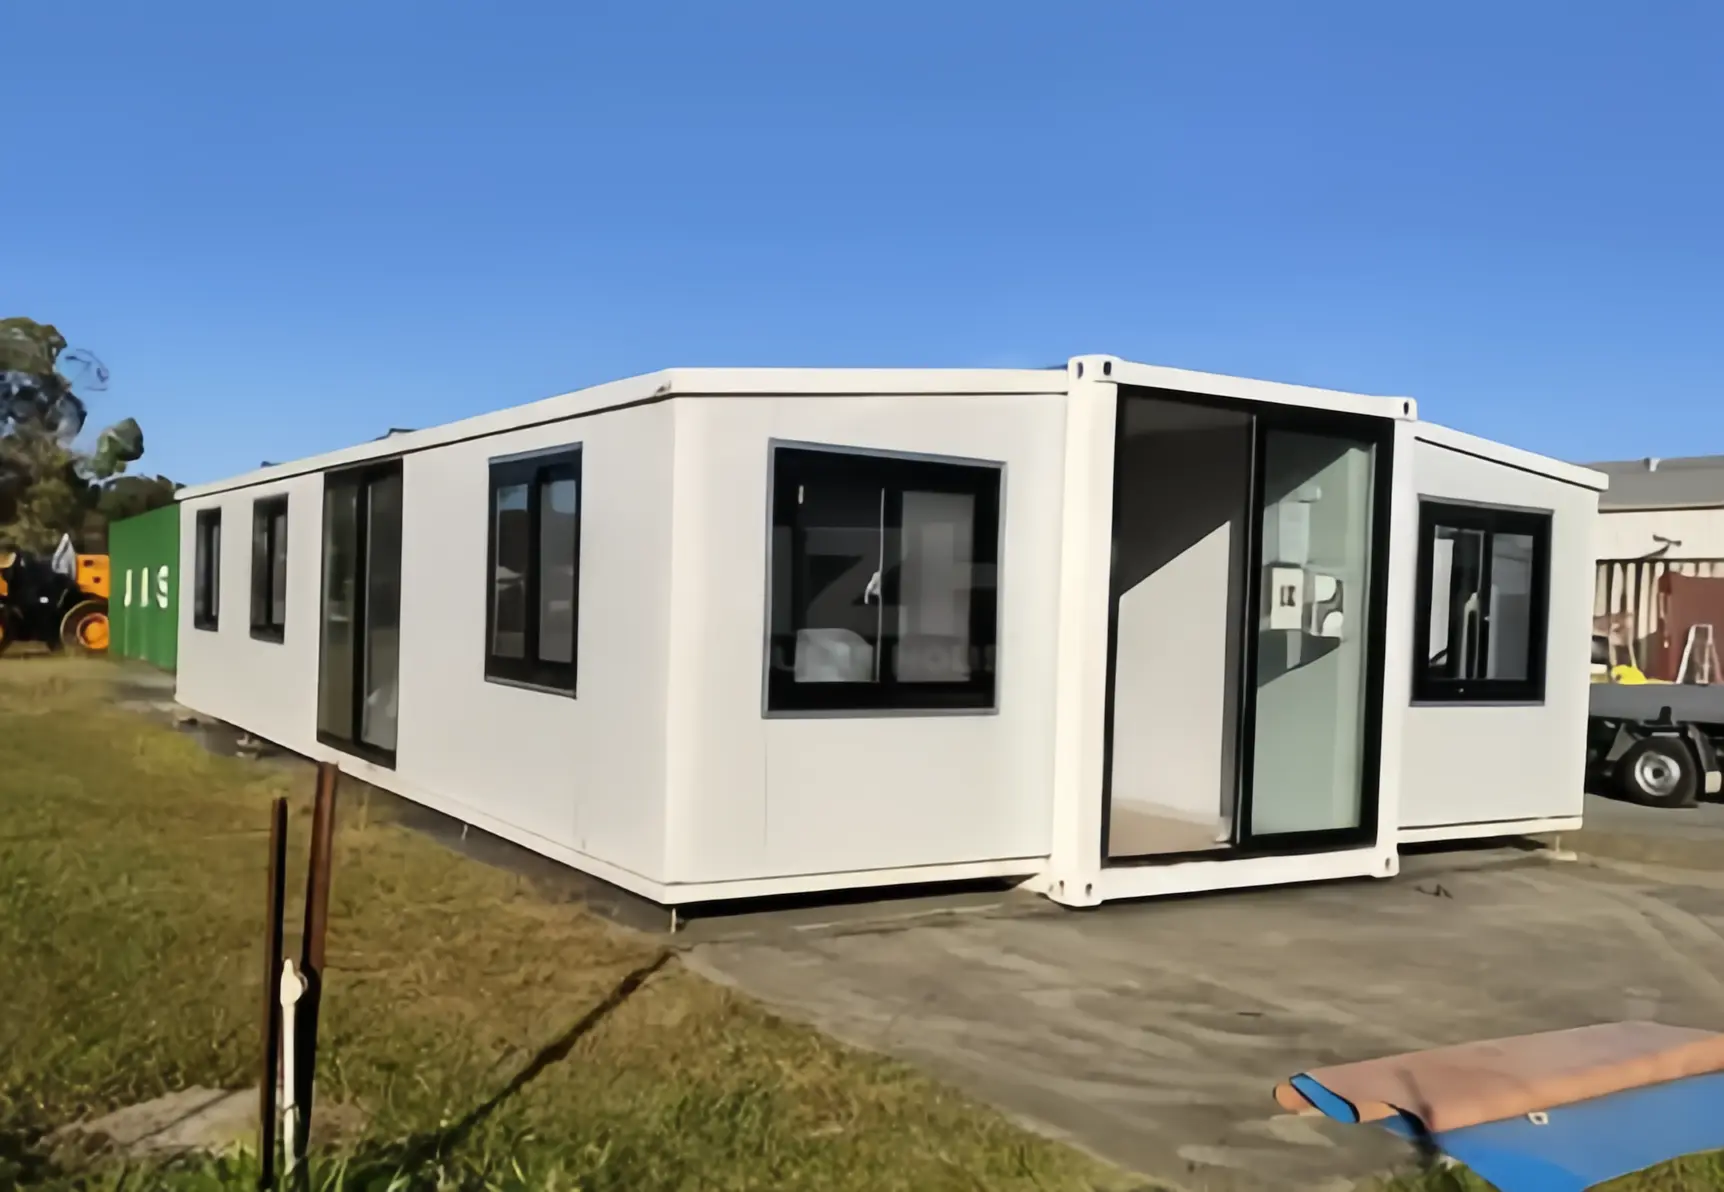 Living in a Shipping Container Home: A Unique Experience